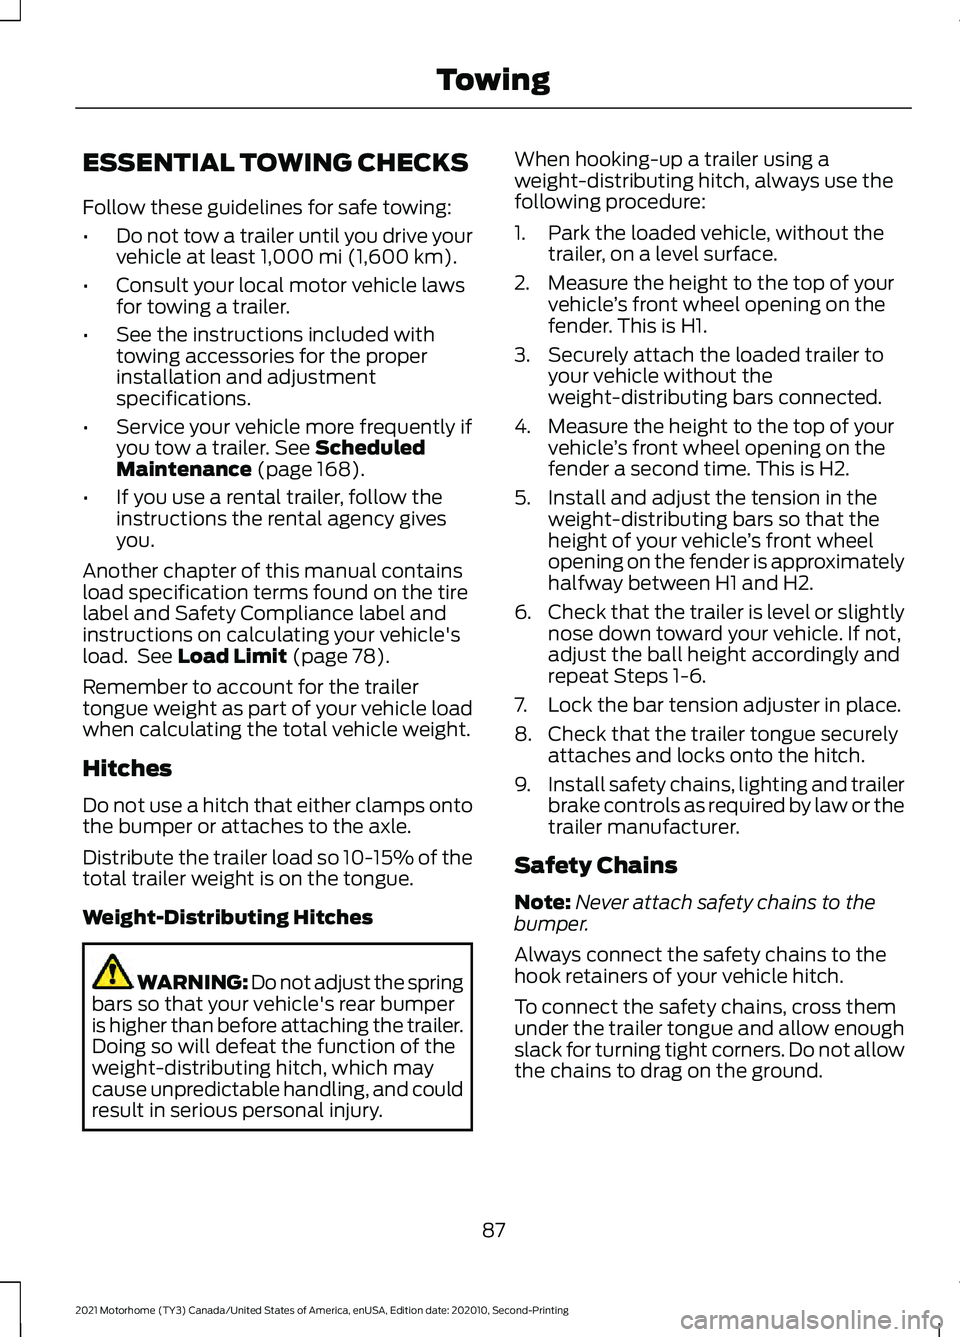 FORD F-59 2021  Owners Manual ESSENTIAL TOWING CHECKS
Follow these guidelines for safe towing:
•
Do not tow a trailer until you drive your
vehicle at least 1,000 mi (1,600 km).
• Consult your local motor vehicle laws
for towin